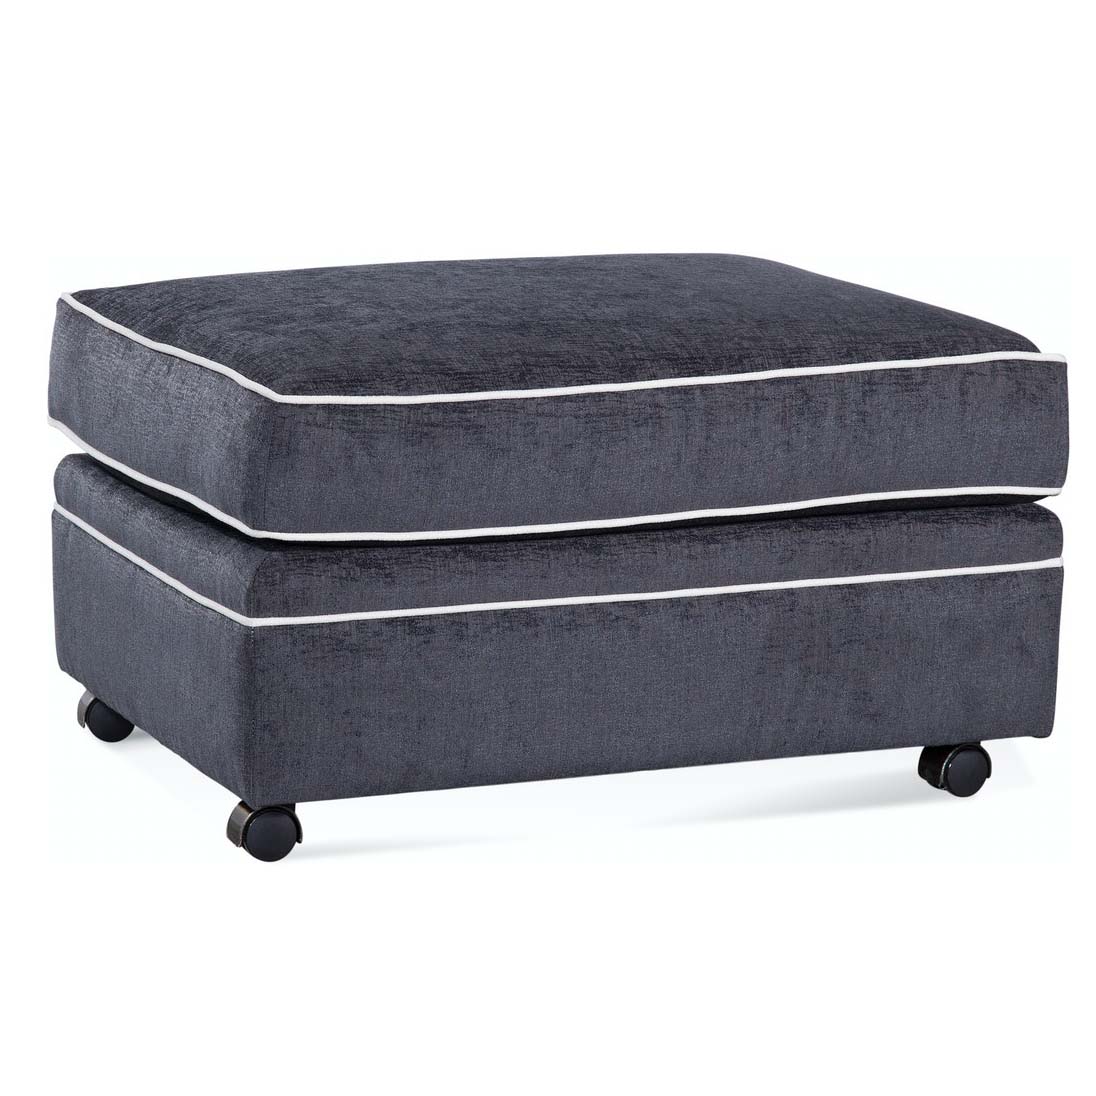 Bradbury Indoor Ottoman with Casters by Braxton Culler Model 6000-109 – Choice of Cushions Made in the USA